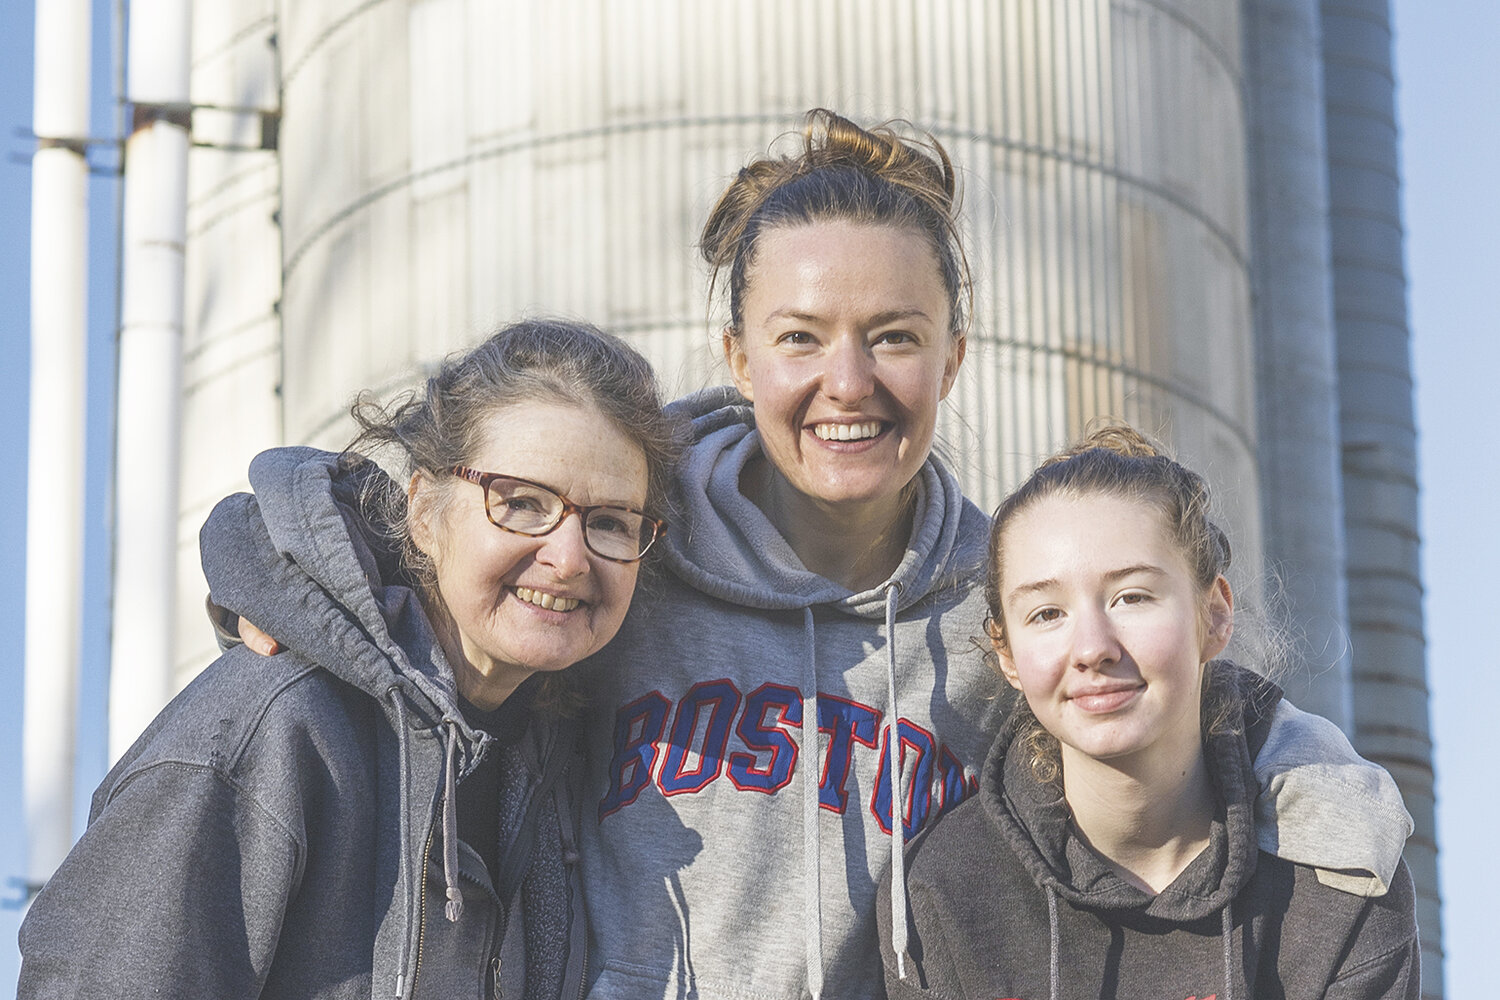 Wendy Dornbusch (from left), Annalee Beaver and Carolyn Dornbusch stand Jan. 1 at the Dornbusch farm near Perham, Minnesota. Carolyn helps with the marketing and graphic design when she has time between schooling.